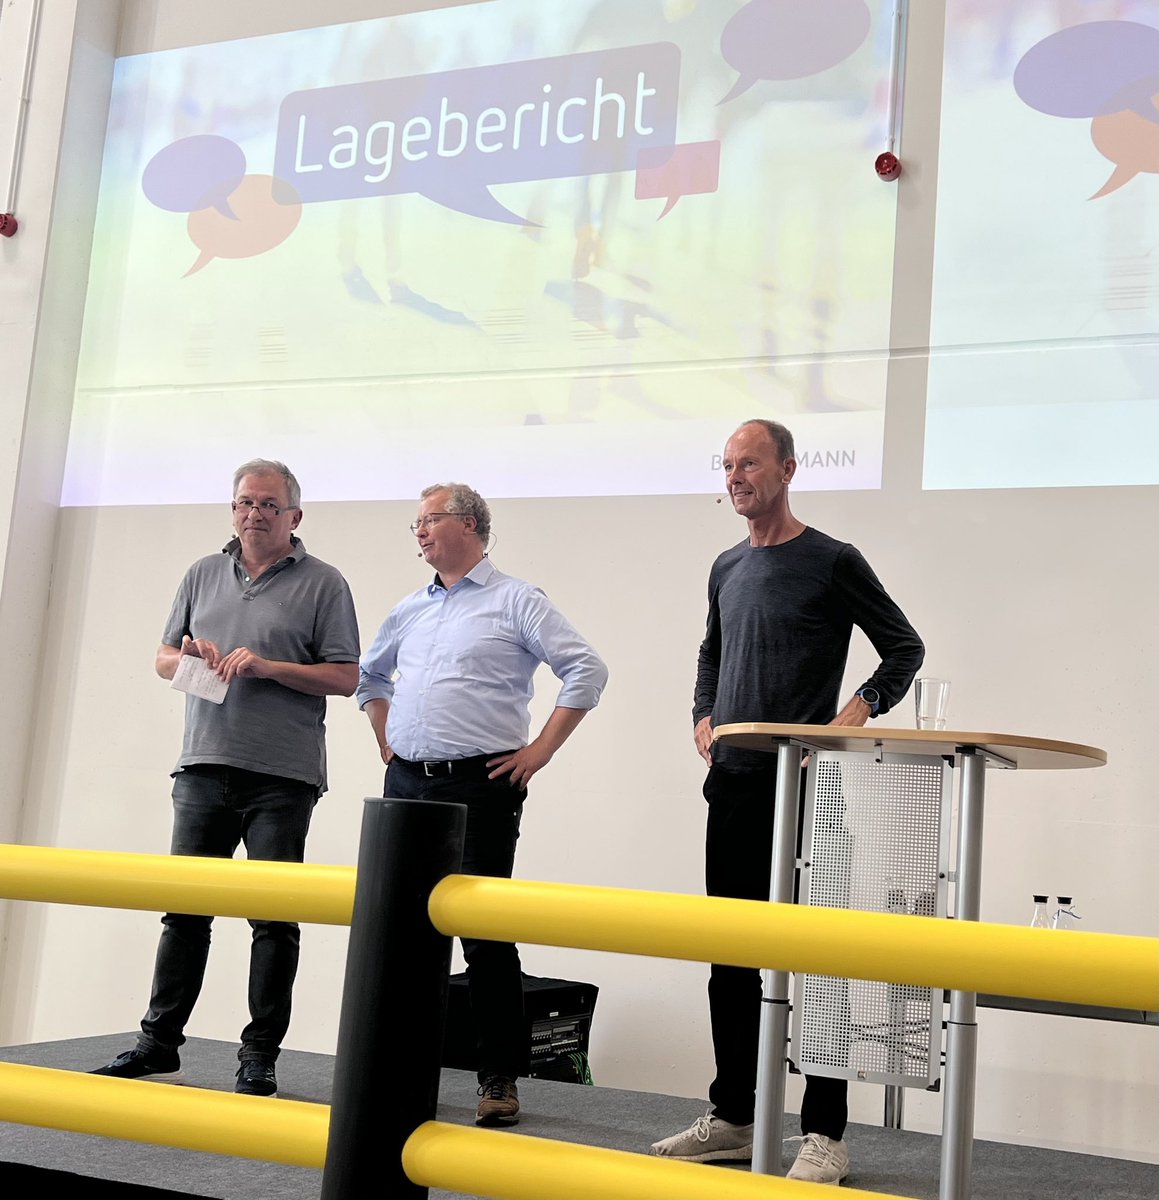 Last Bertelsmann management report of the year in Heideloh – an update for the colleagues from Arvato on Bertelsmann’s development and performance – with Frank Schirrmeister (CEO Arvato) and Günter Göbel (Chairman of the Corporate Works Council, Bertelsmann SE & Co. KGaA)